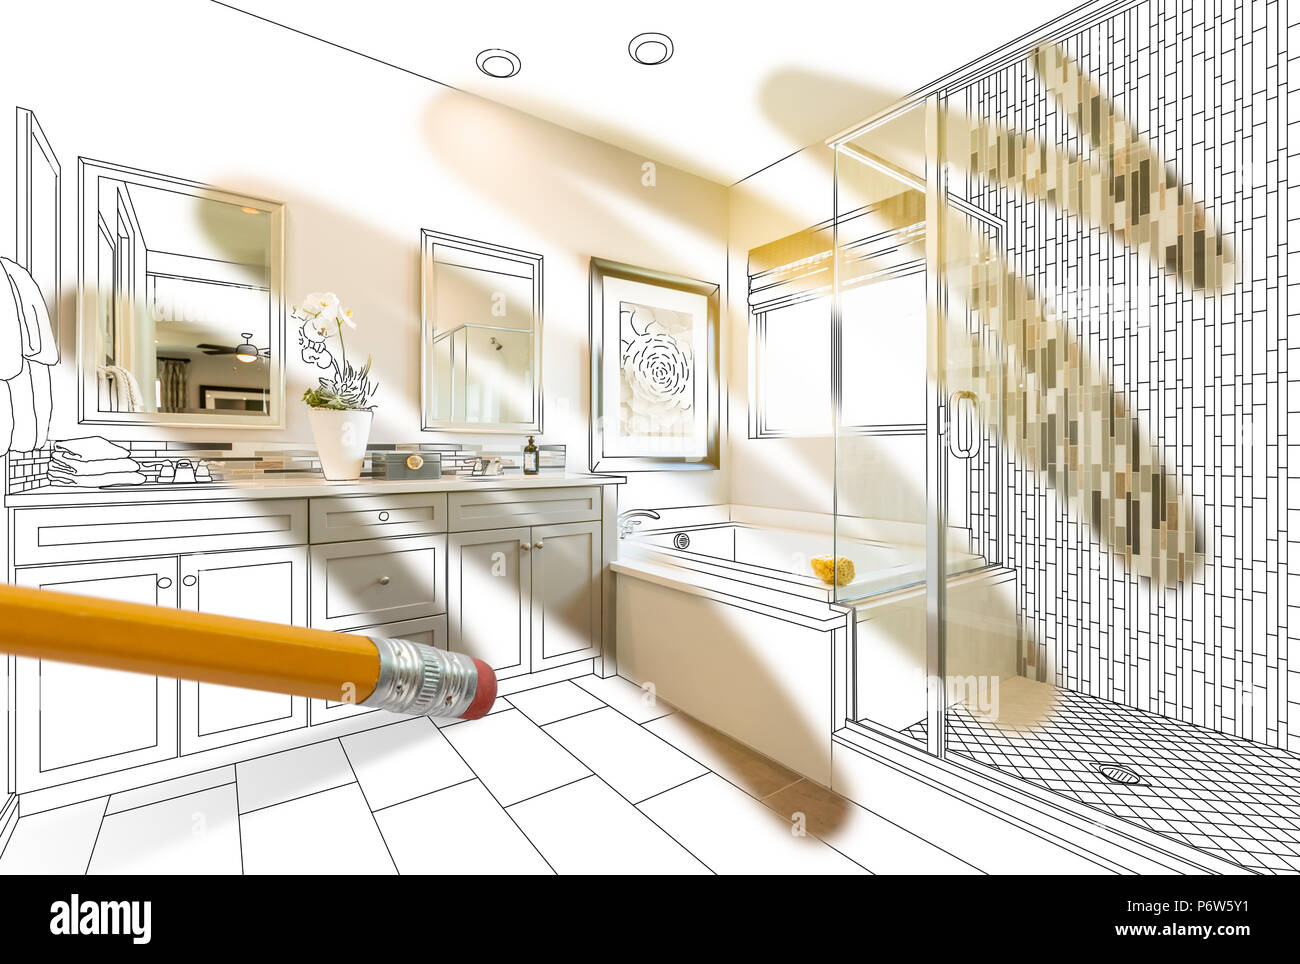 Pencil Erasing Drawing To Reveal Finished Custom Bathroom Design Photograph Stock Photo